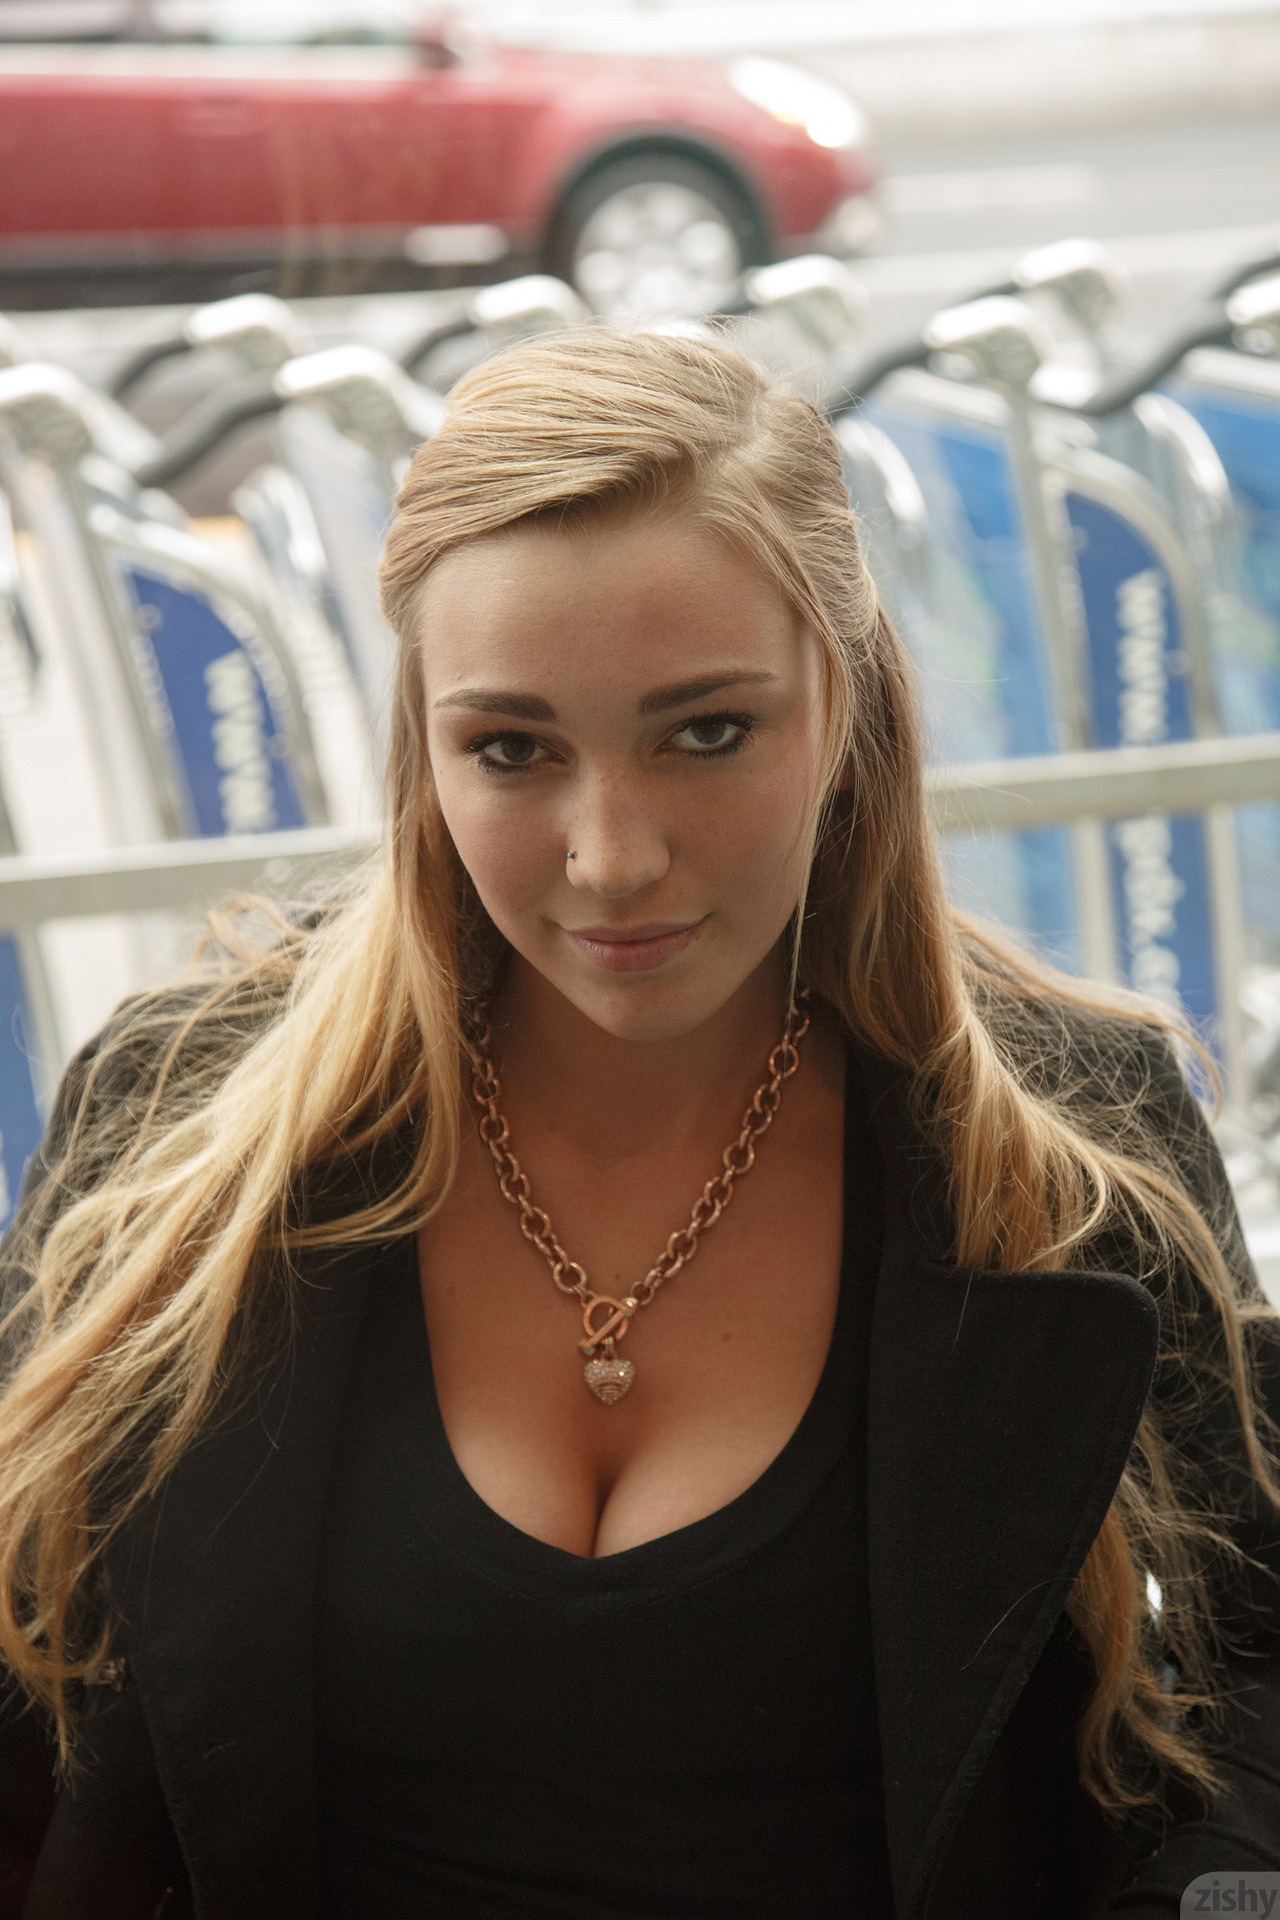 amy rawls recommends More Like Kendra Sunderland